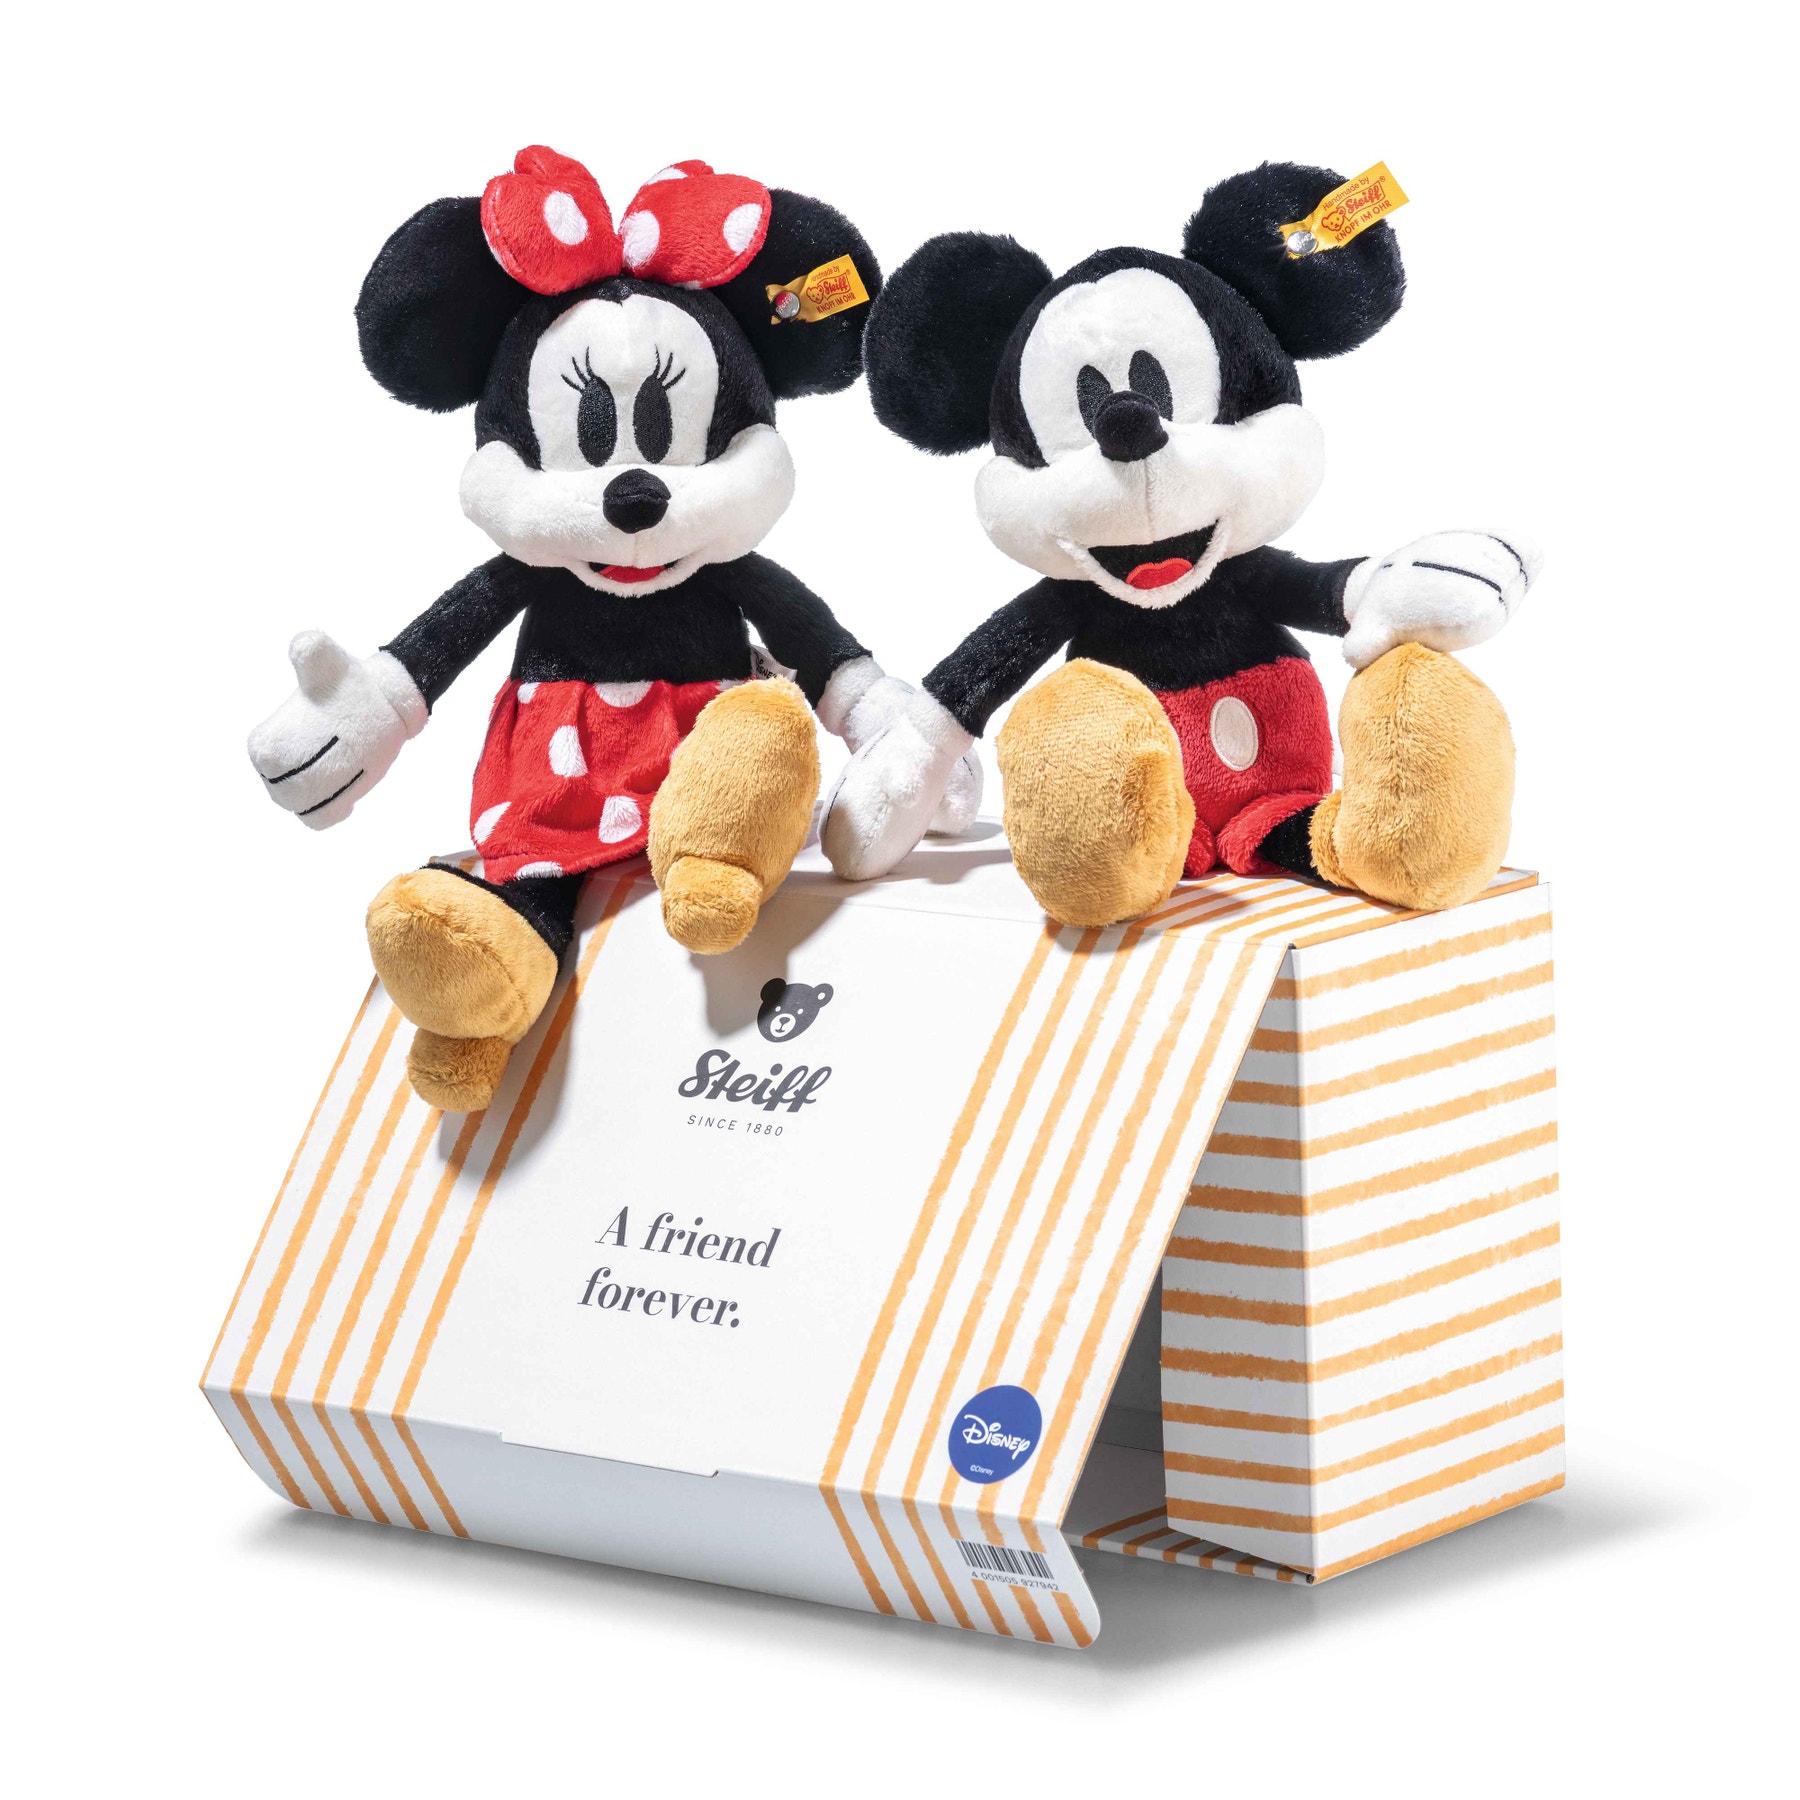 Disney Originals Minnie Mouse and Mickey Mouse gift set